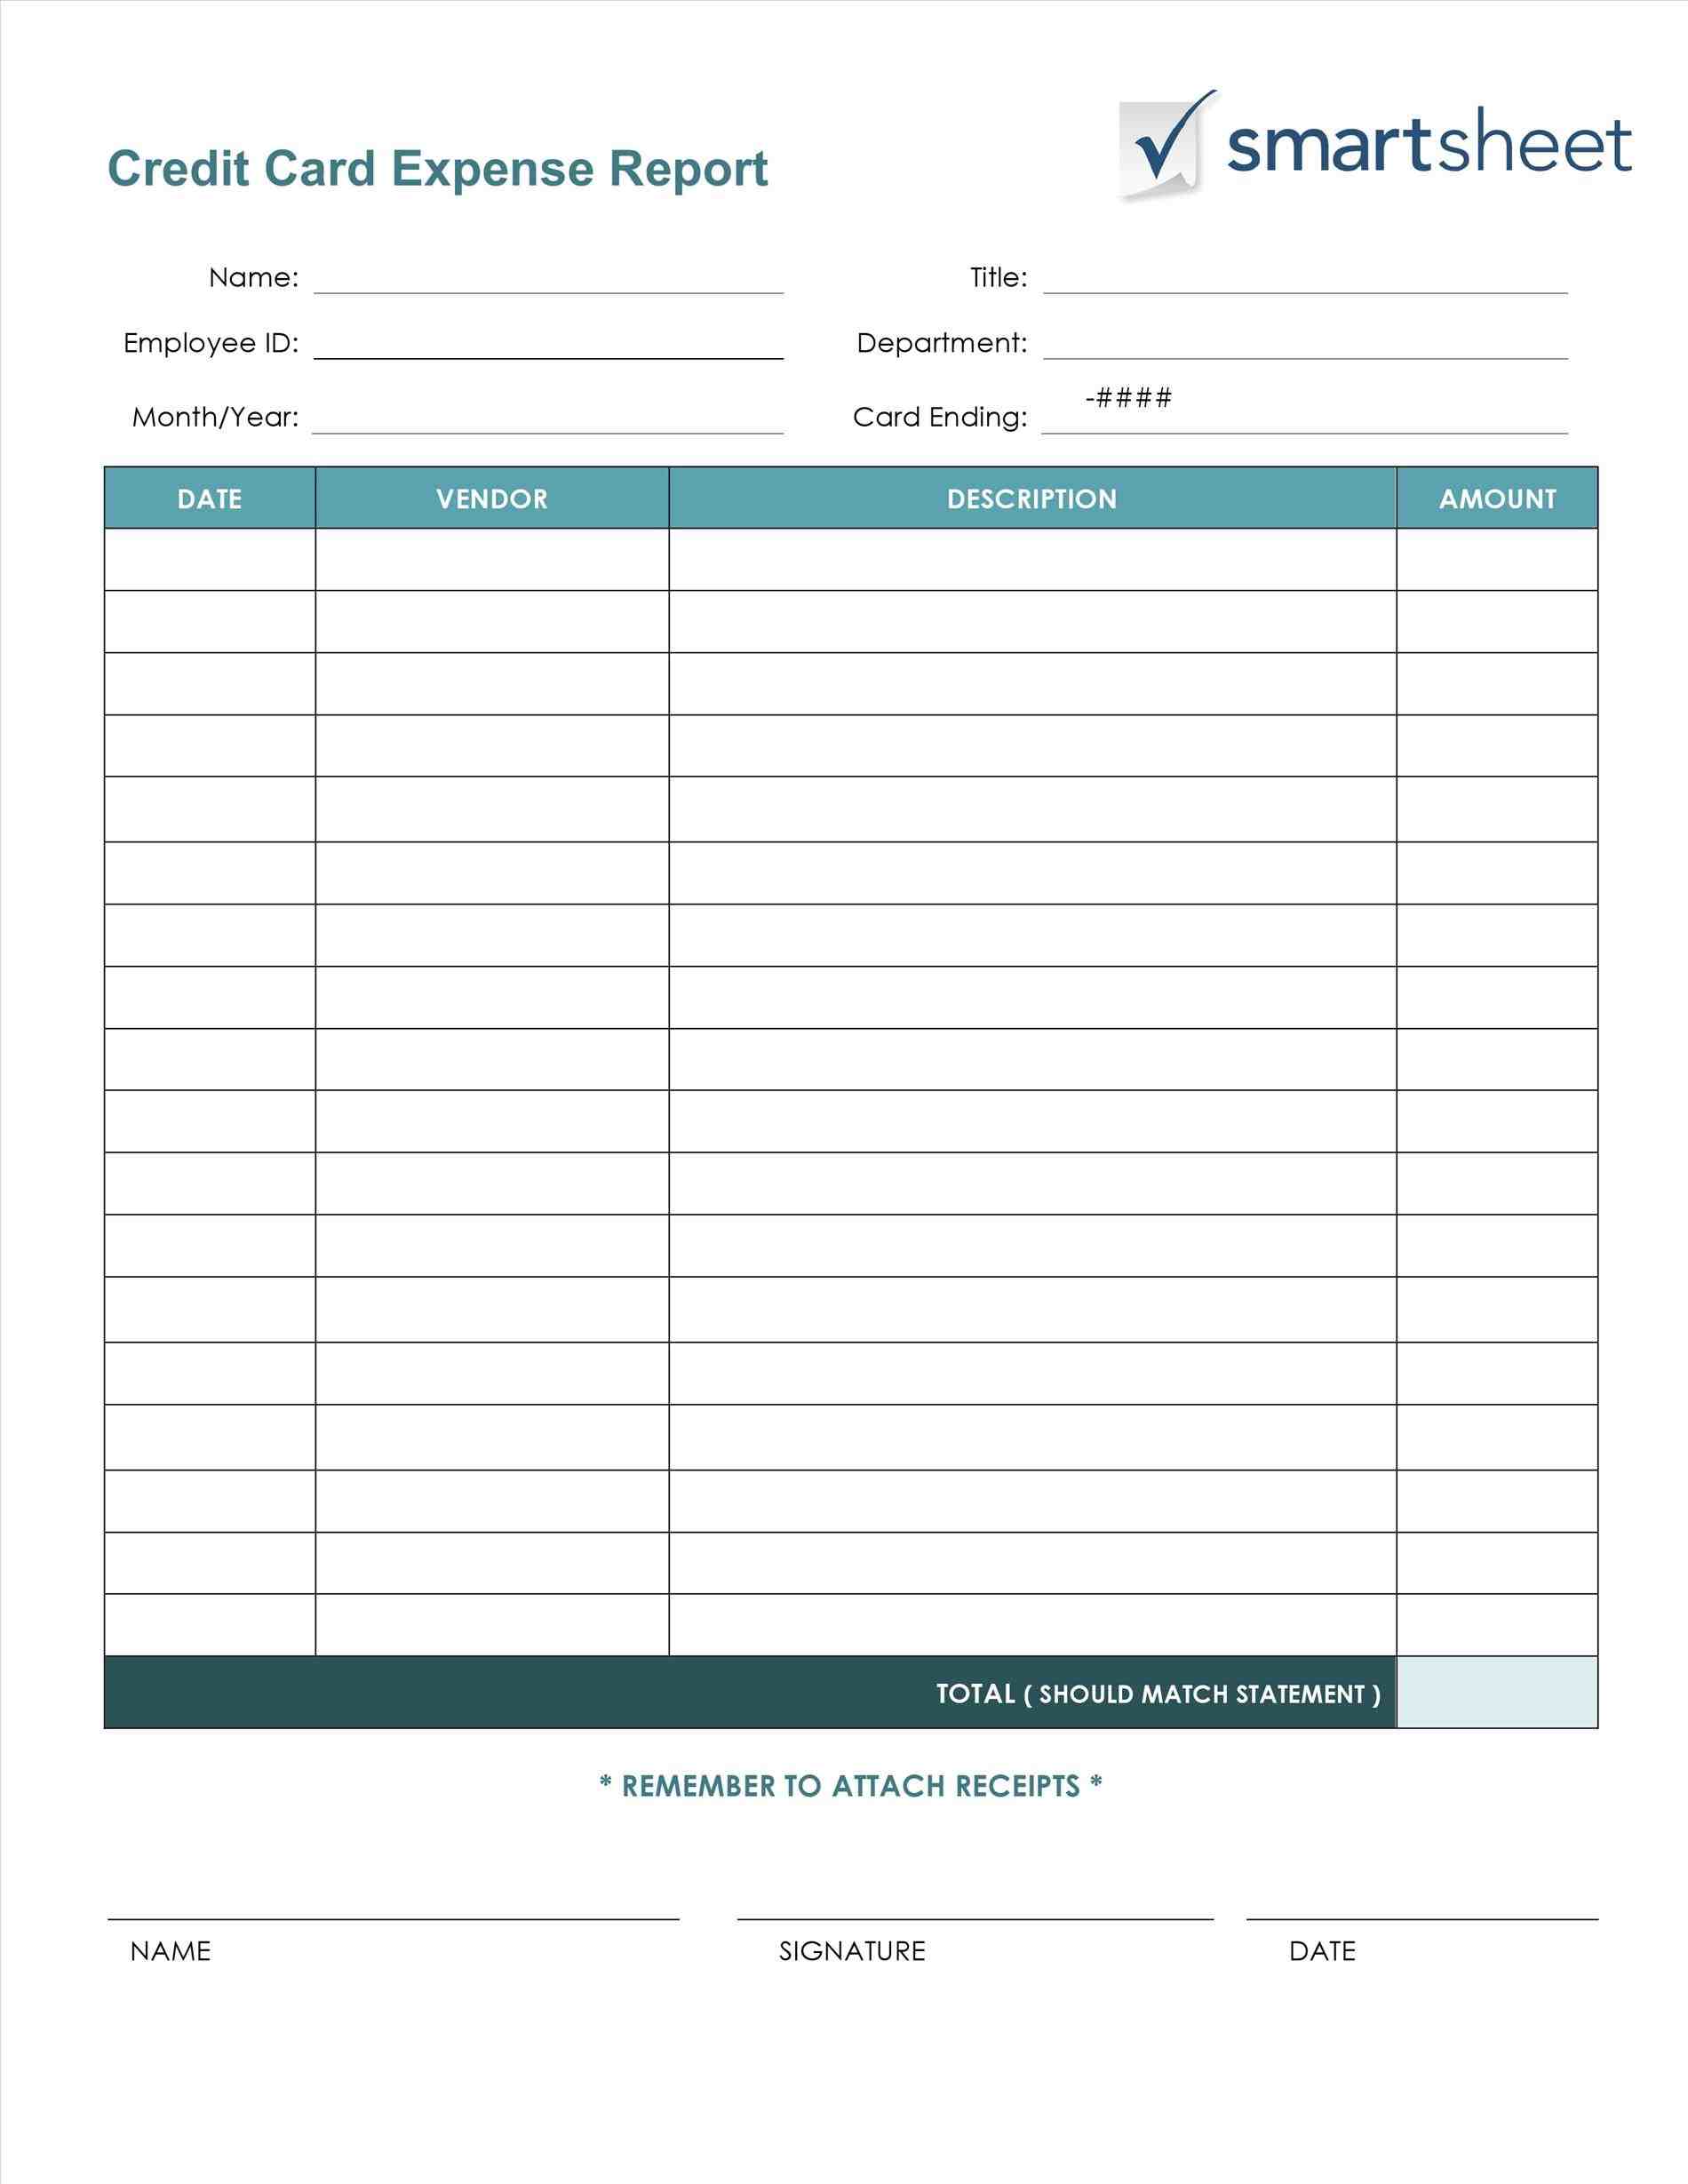 expenses computer inventory rhpropulseco monthly expense report unique small rhgayconet monthly Excel Templates For Business Expenses expense report template excel unique